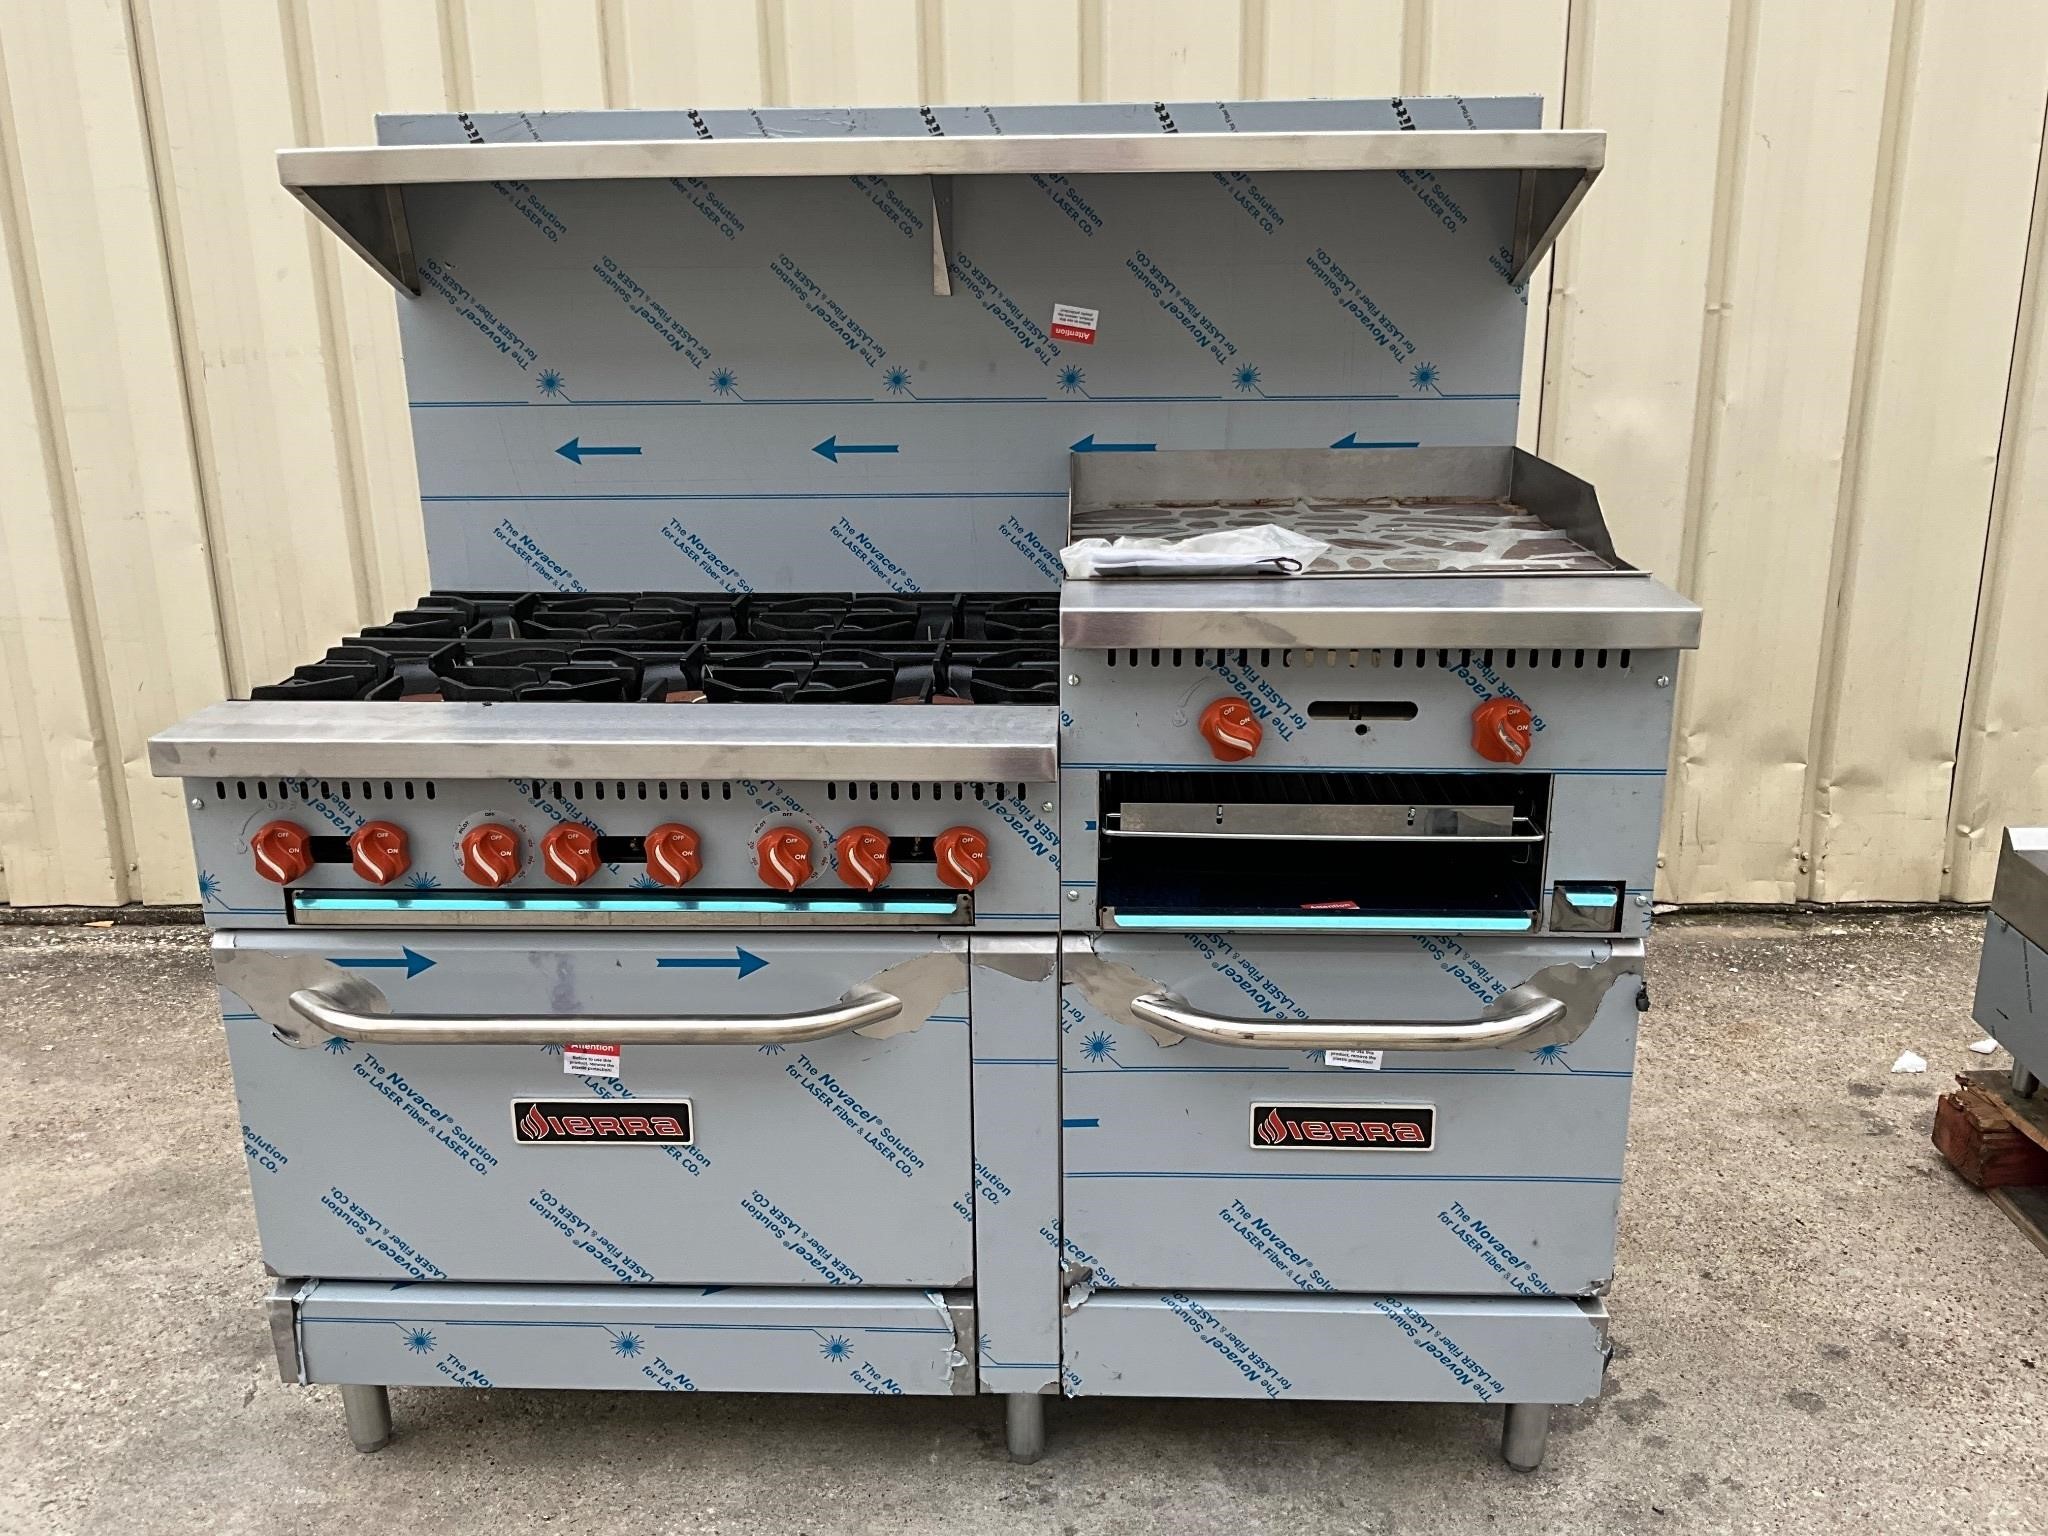 May 29th Restaurant and Bakery Auction